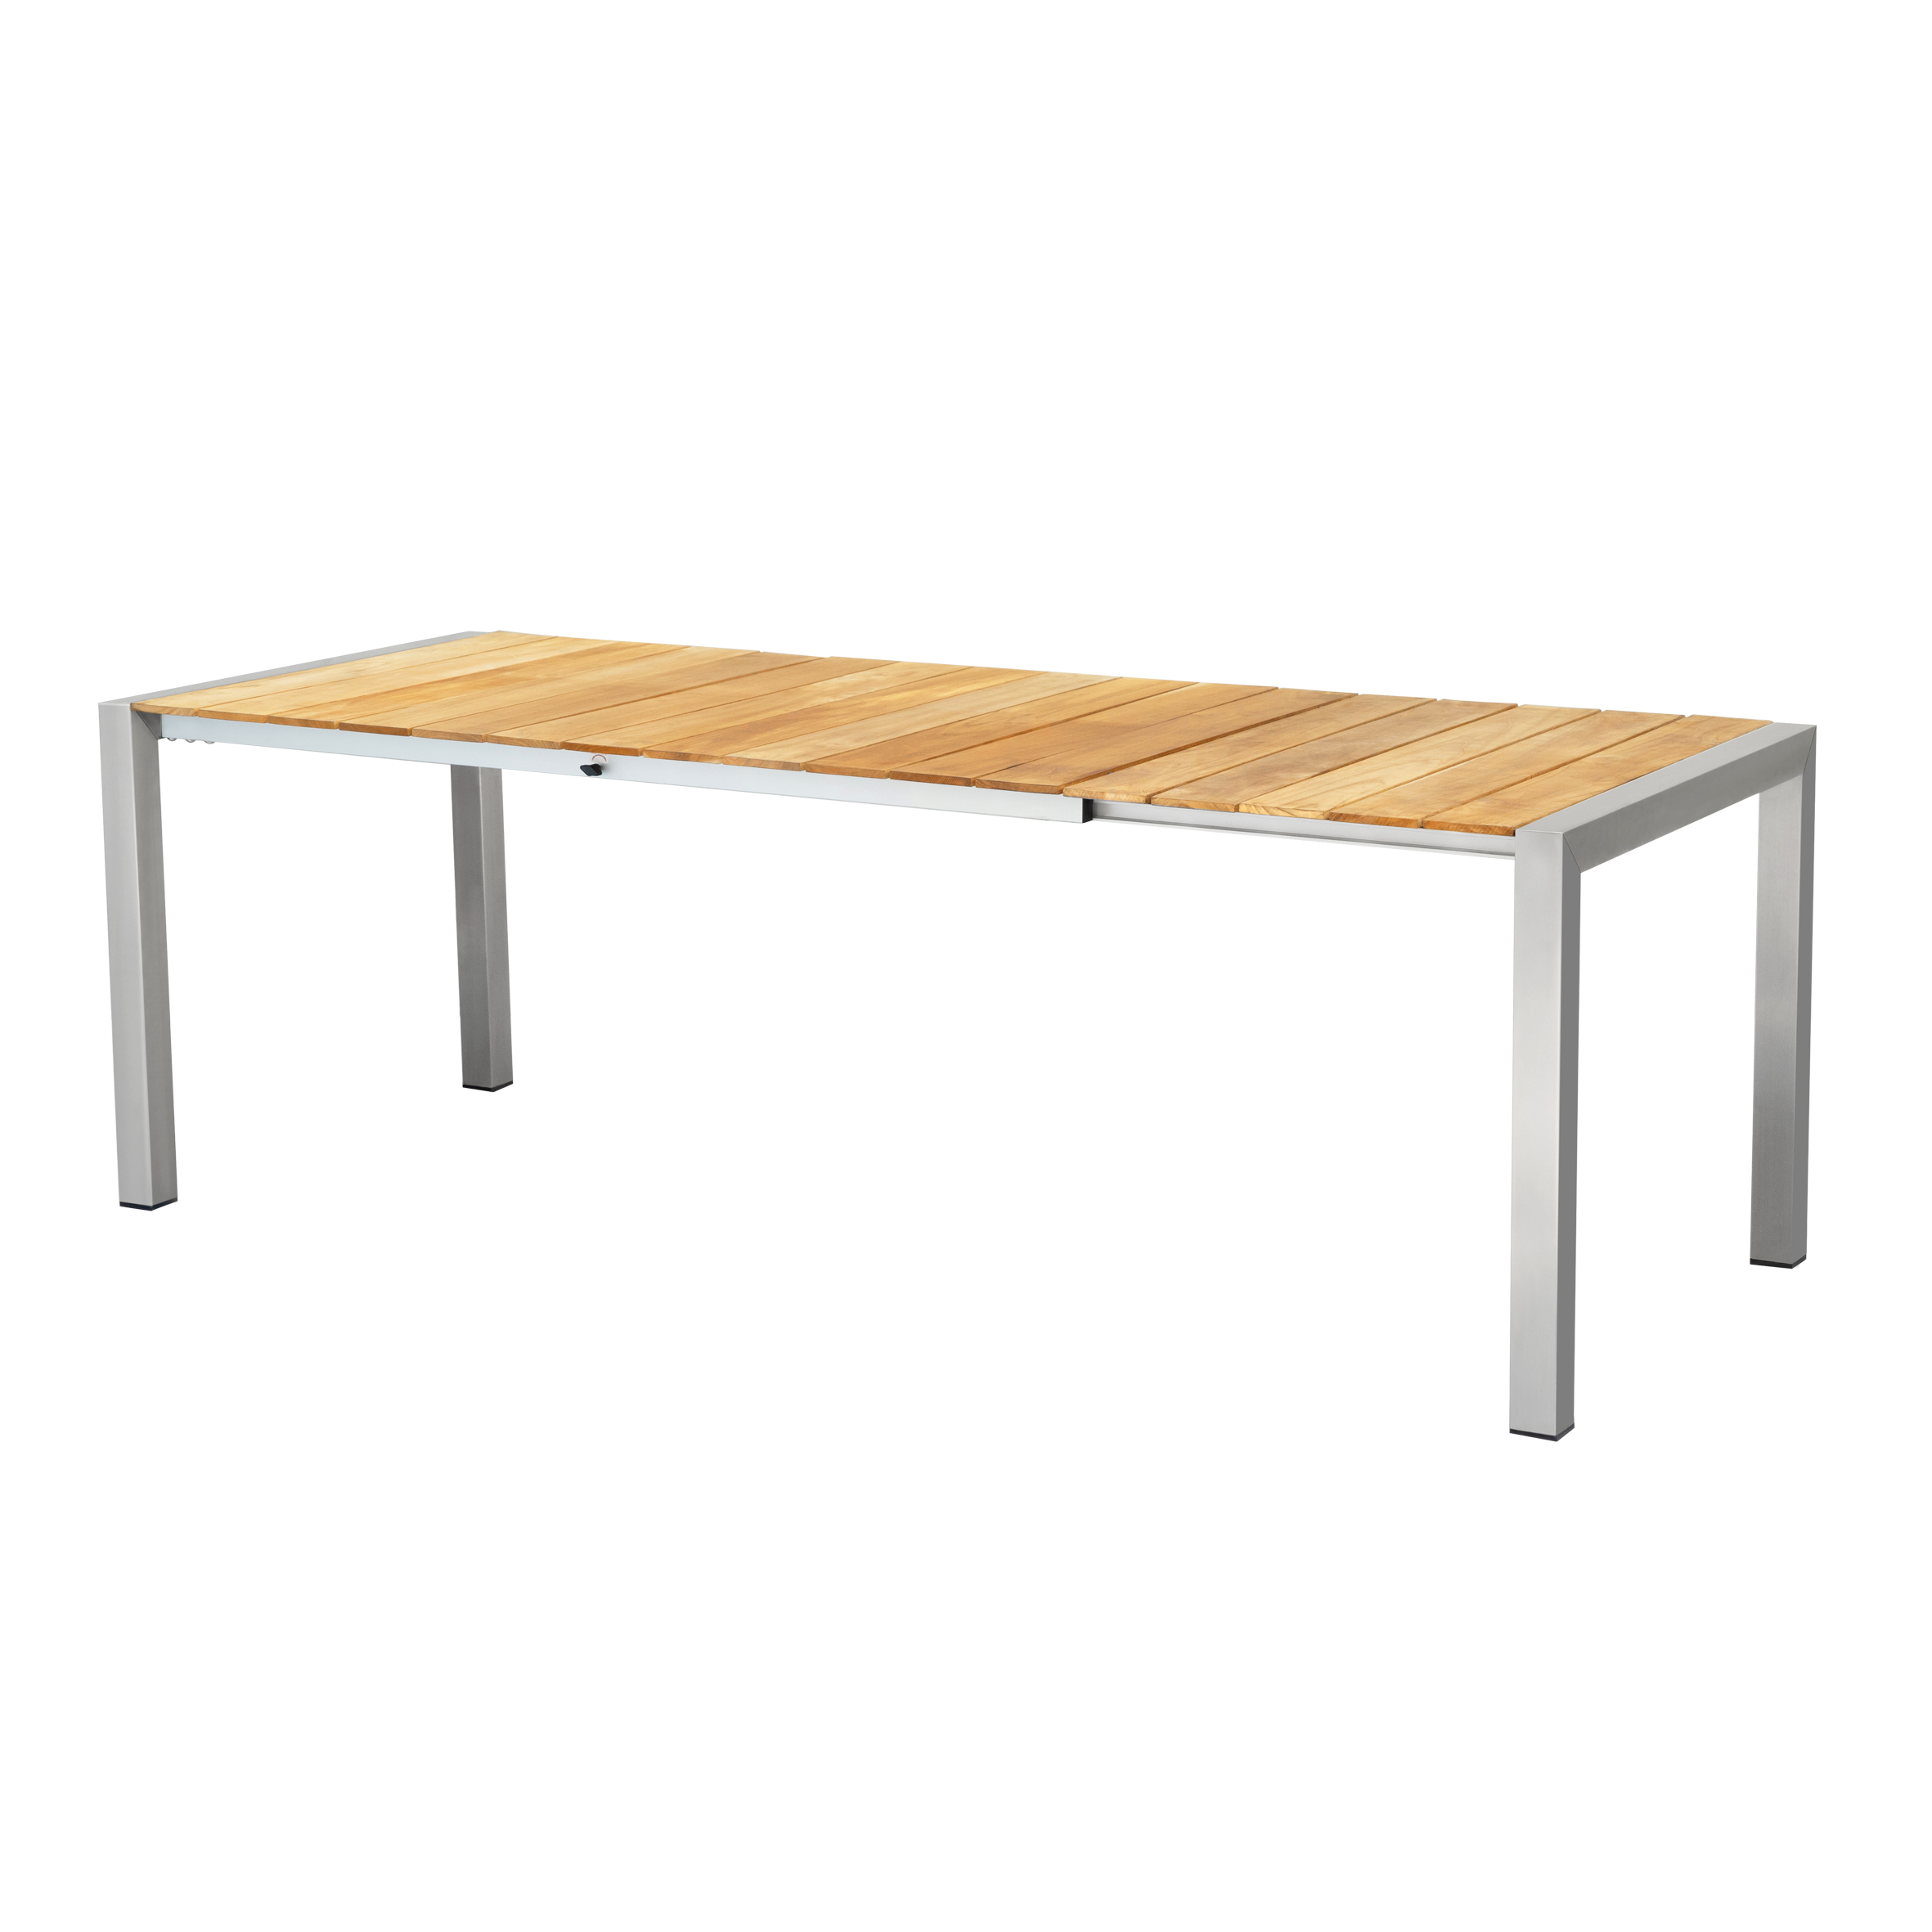 Alps manual extension table S1